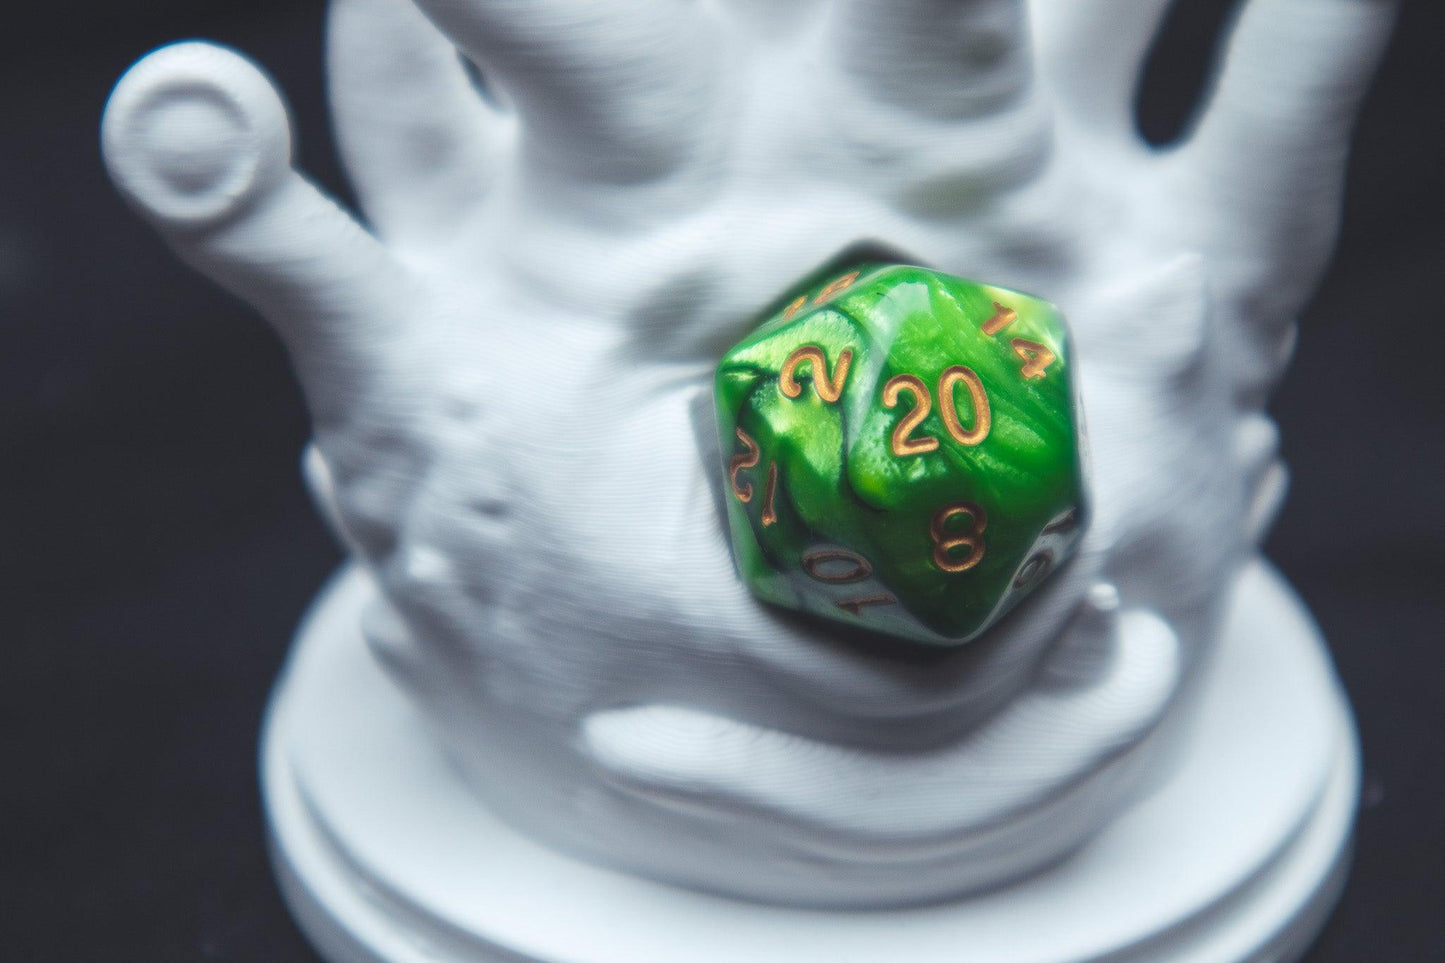 Beholder dice guardian - The Flaming Feather & Flaming Filament